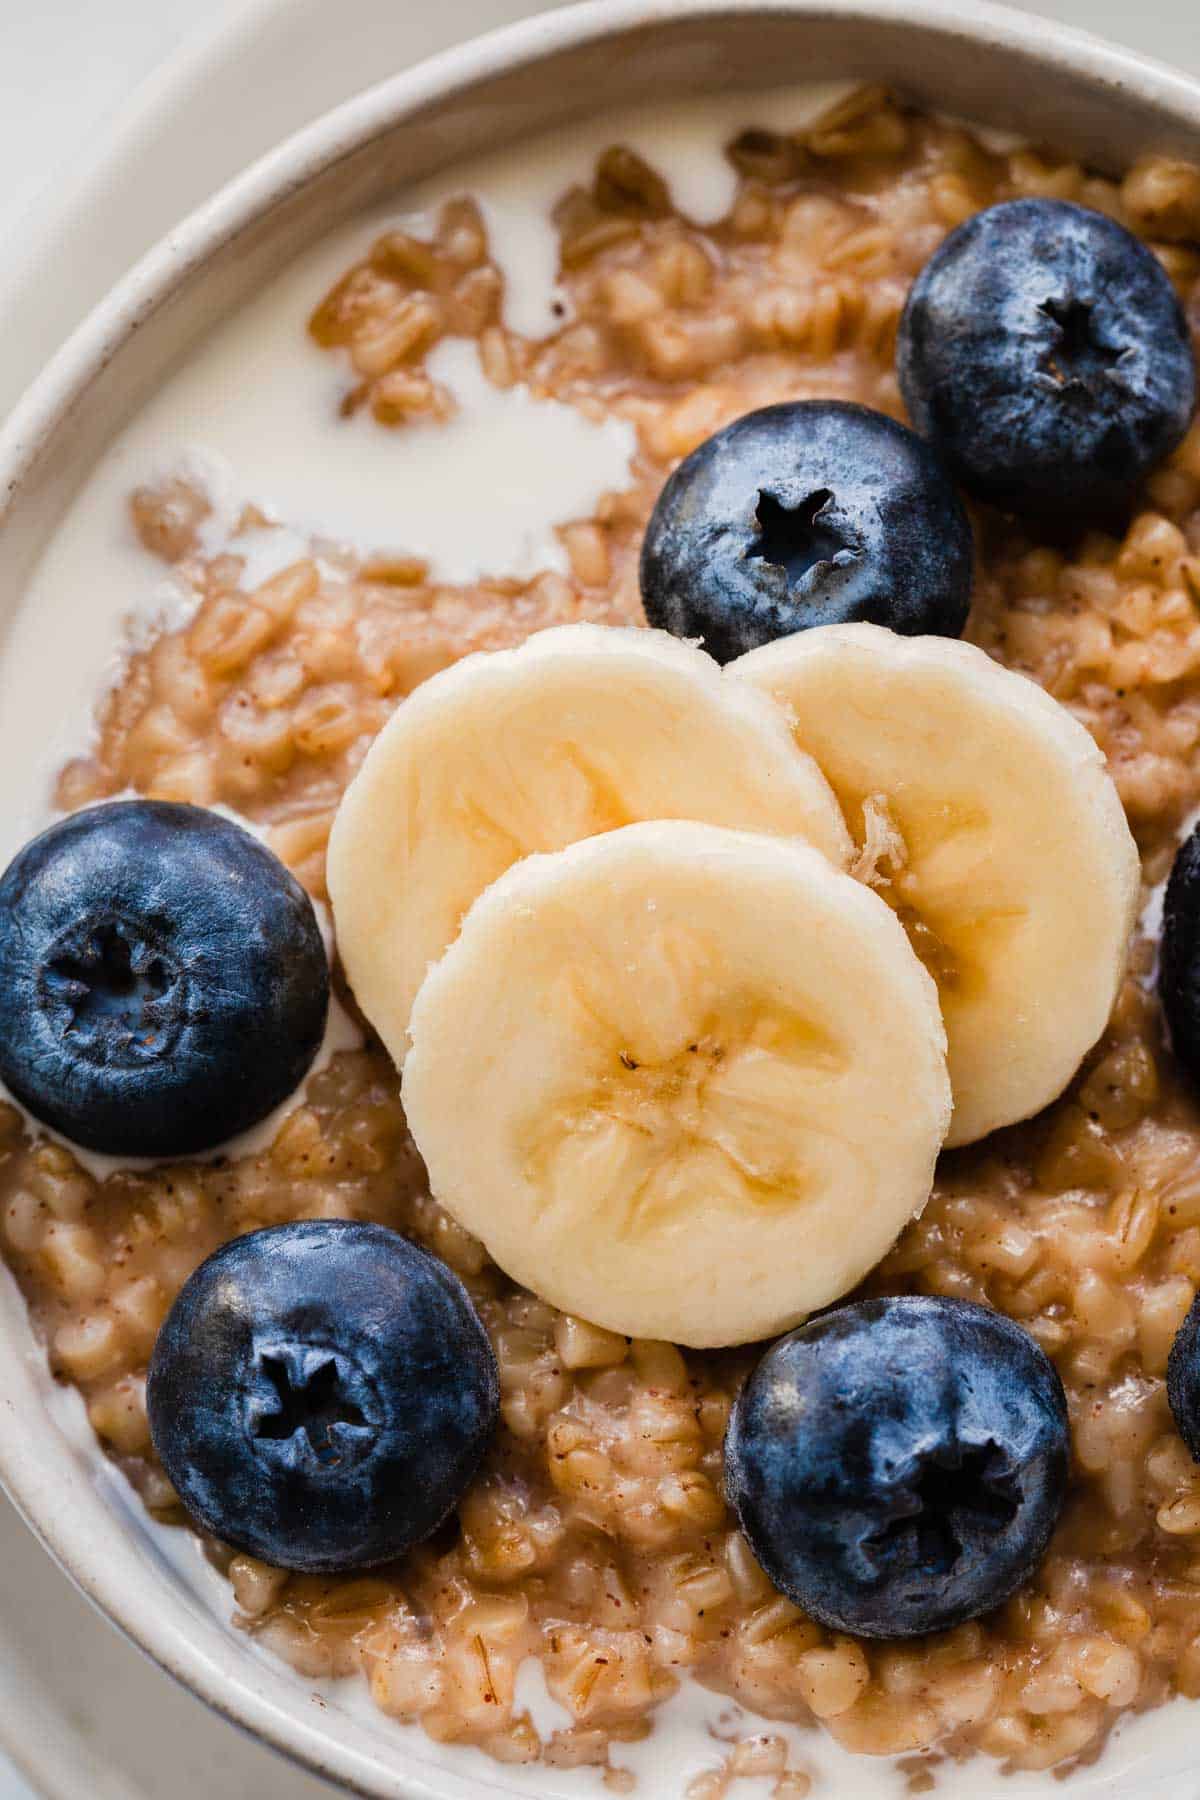 Steel cut oats with banana and blueberries.